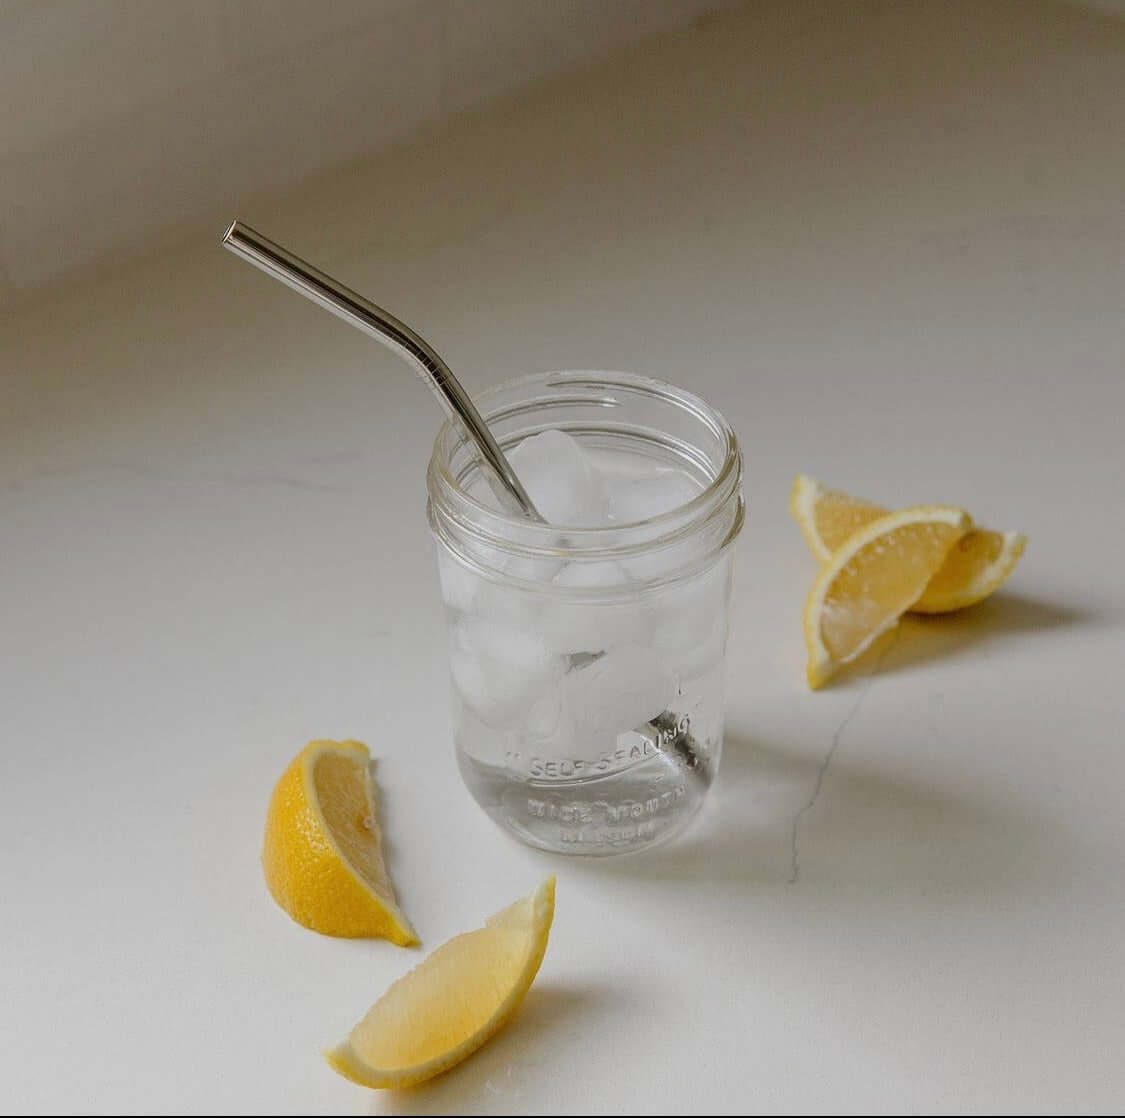 A stainless steel straw sticking out of a glass, filled with ice water, and lemon wedges on the counter next to it.